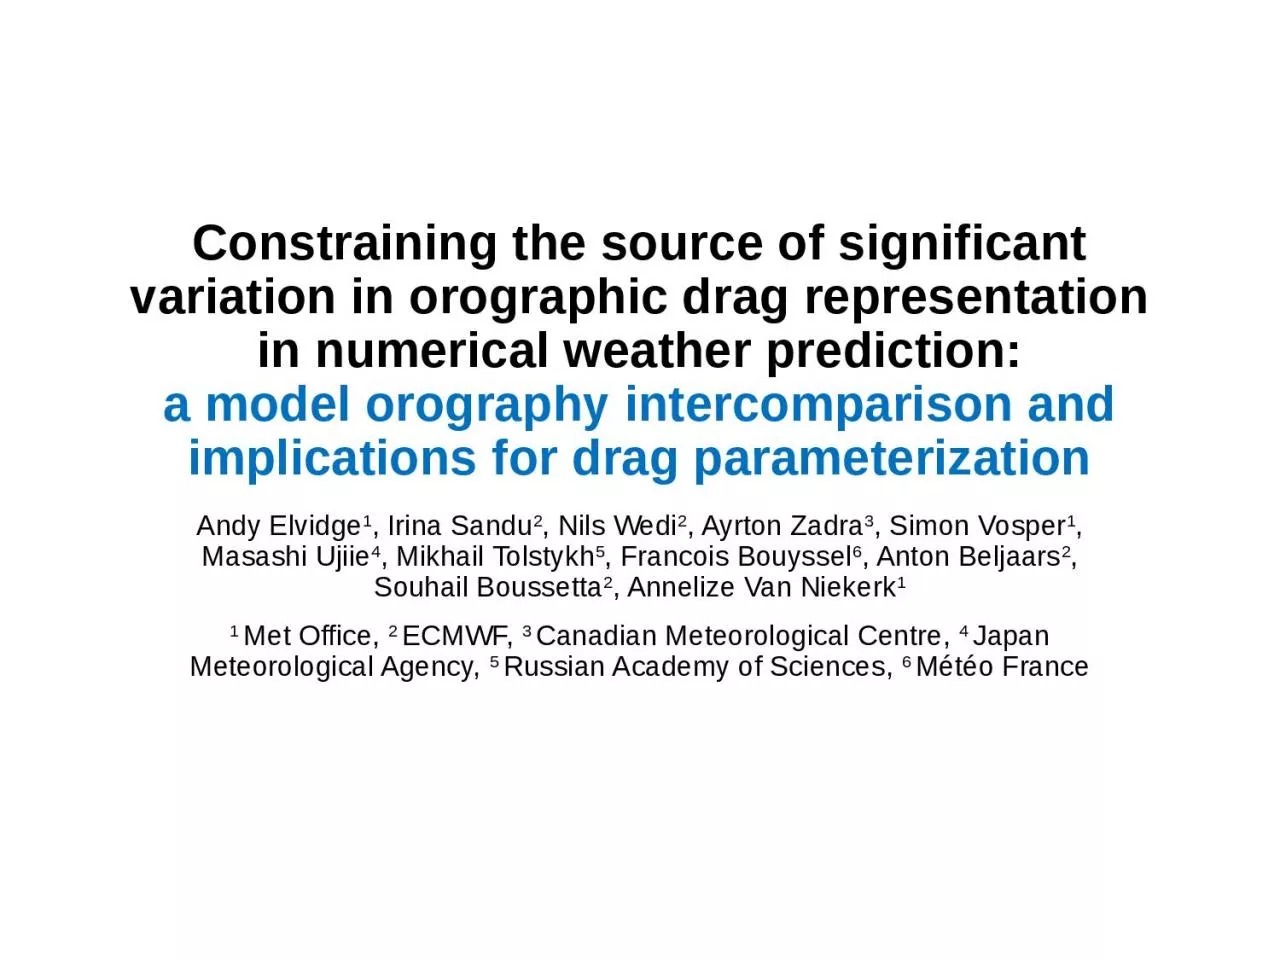 Constraining the source of significant variation in orographic drag representation in